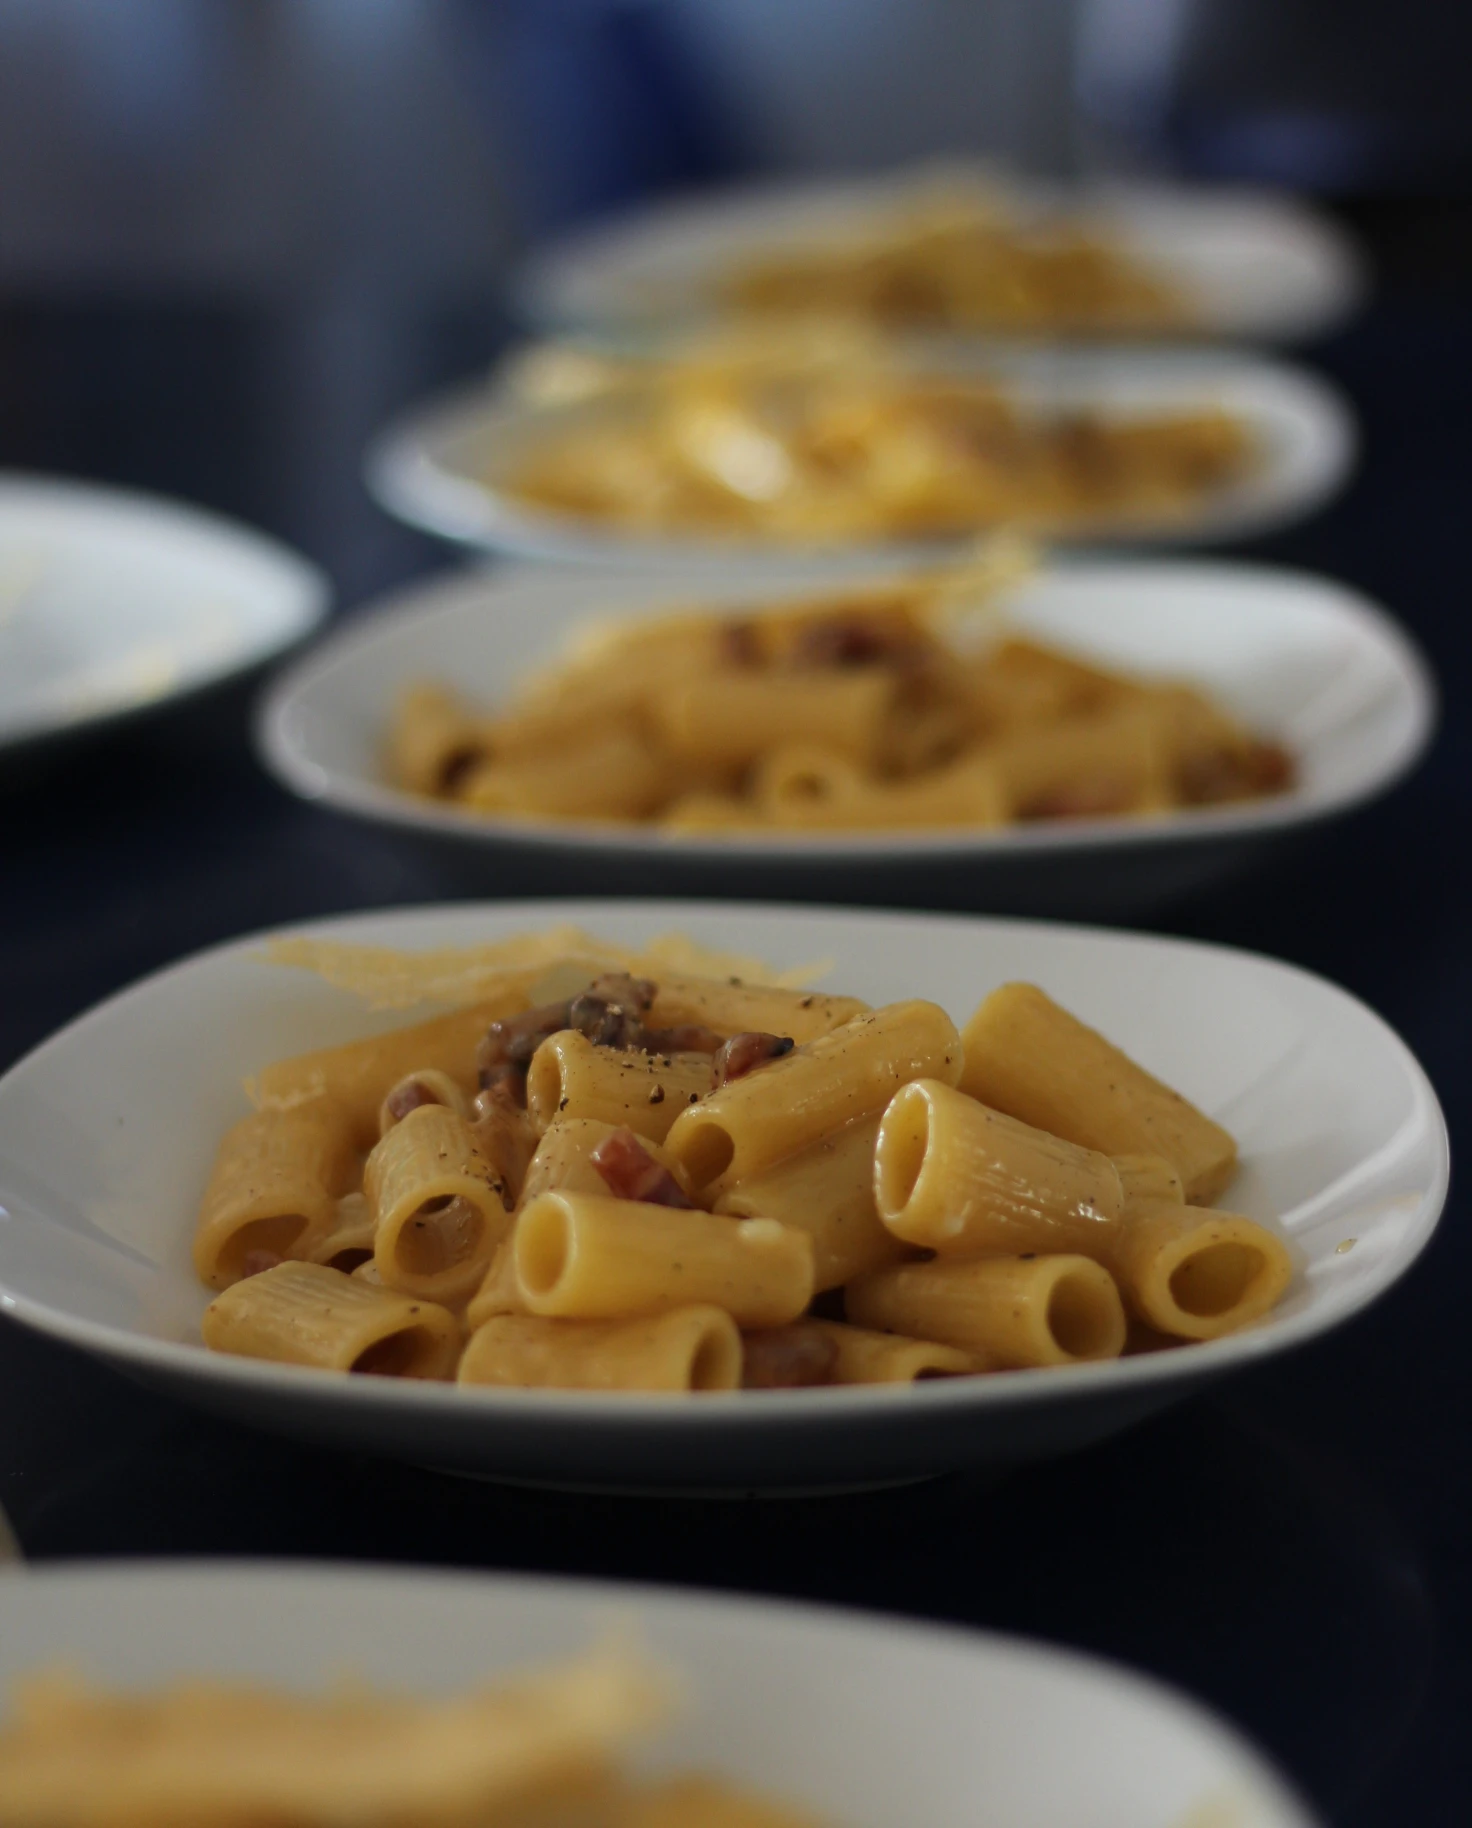 Plates of pasta in Rome. 